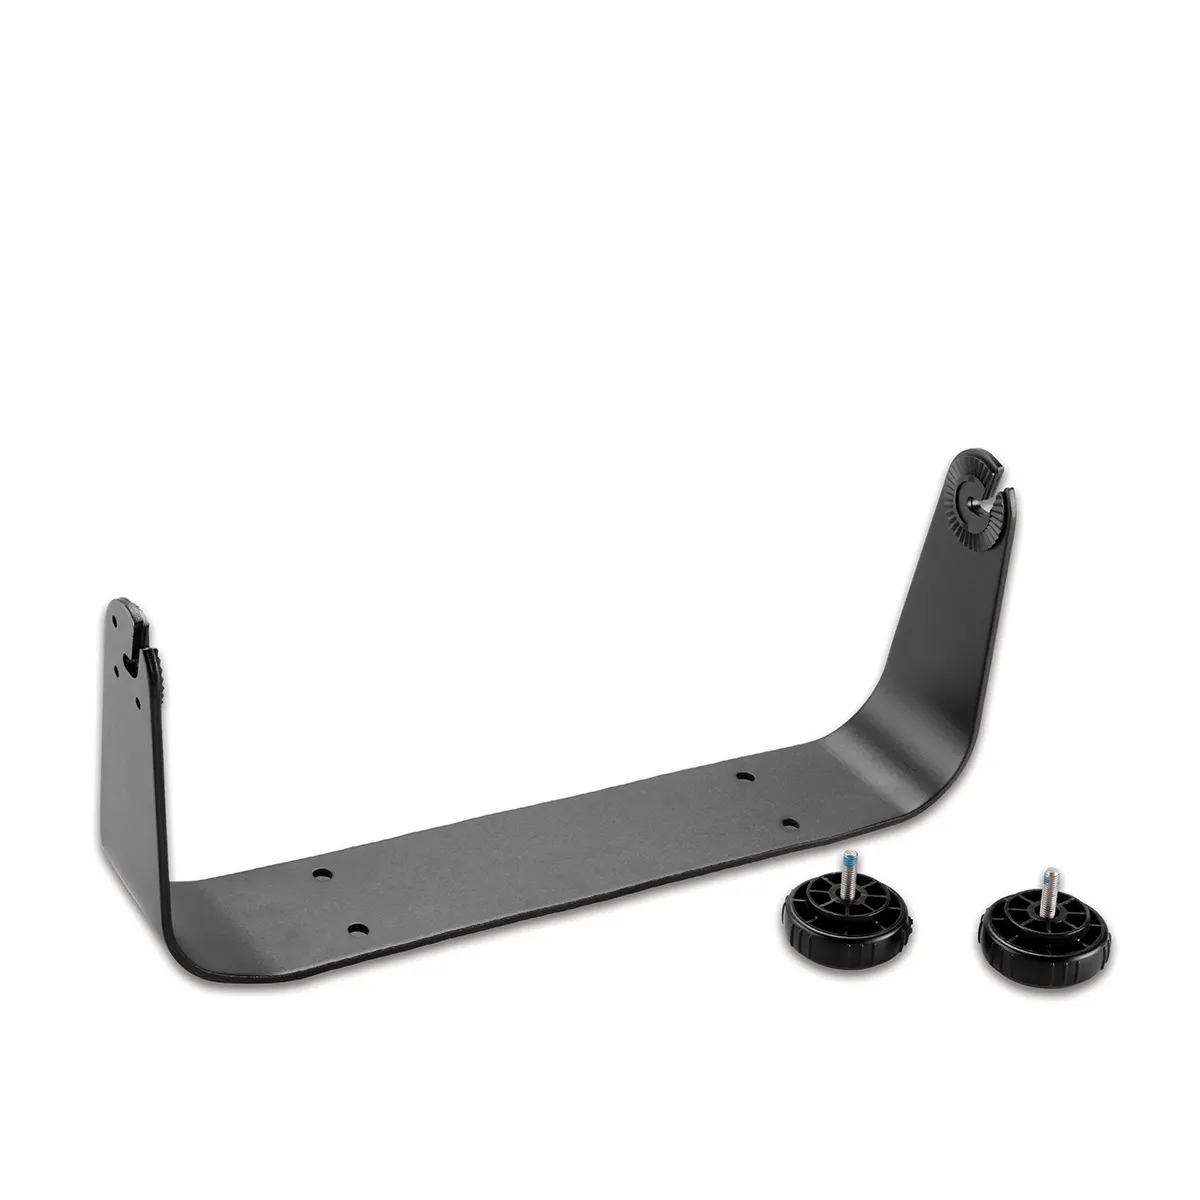 Garmin Bail Mount with Knobs for GPSMAP 1000 series